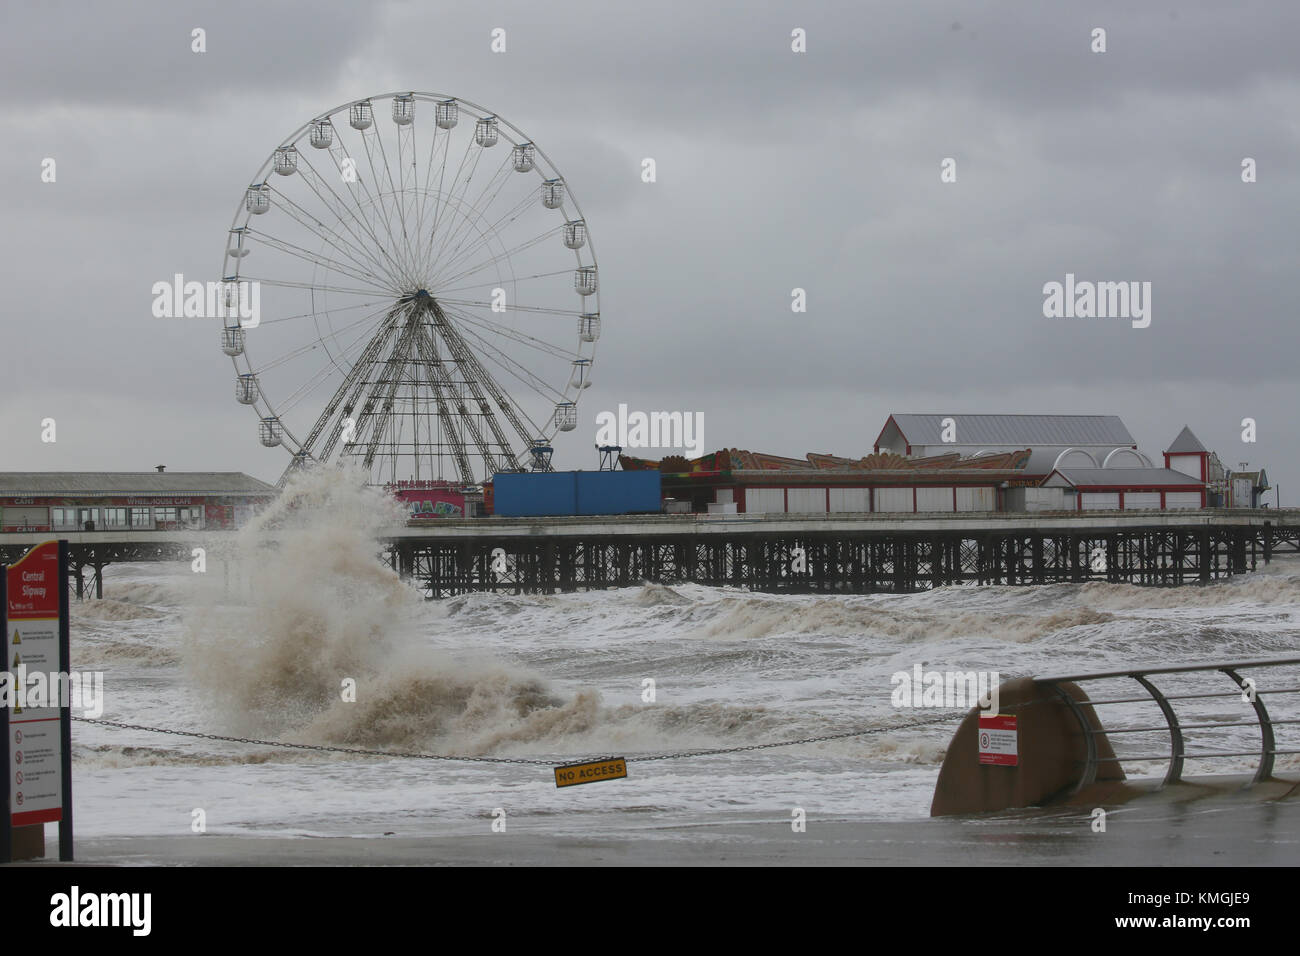 Blackpool, UK. 07th Dec, 2017. Stormy seas with a Ferris wheel in the background, Blackpool, Lancashire,7th December, 2017 (C)Barbara Cook/Alamy Live News Credit: Barbara Cook/Alamy Live News Stock Photo